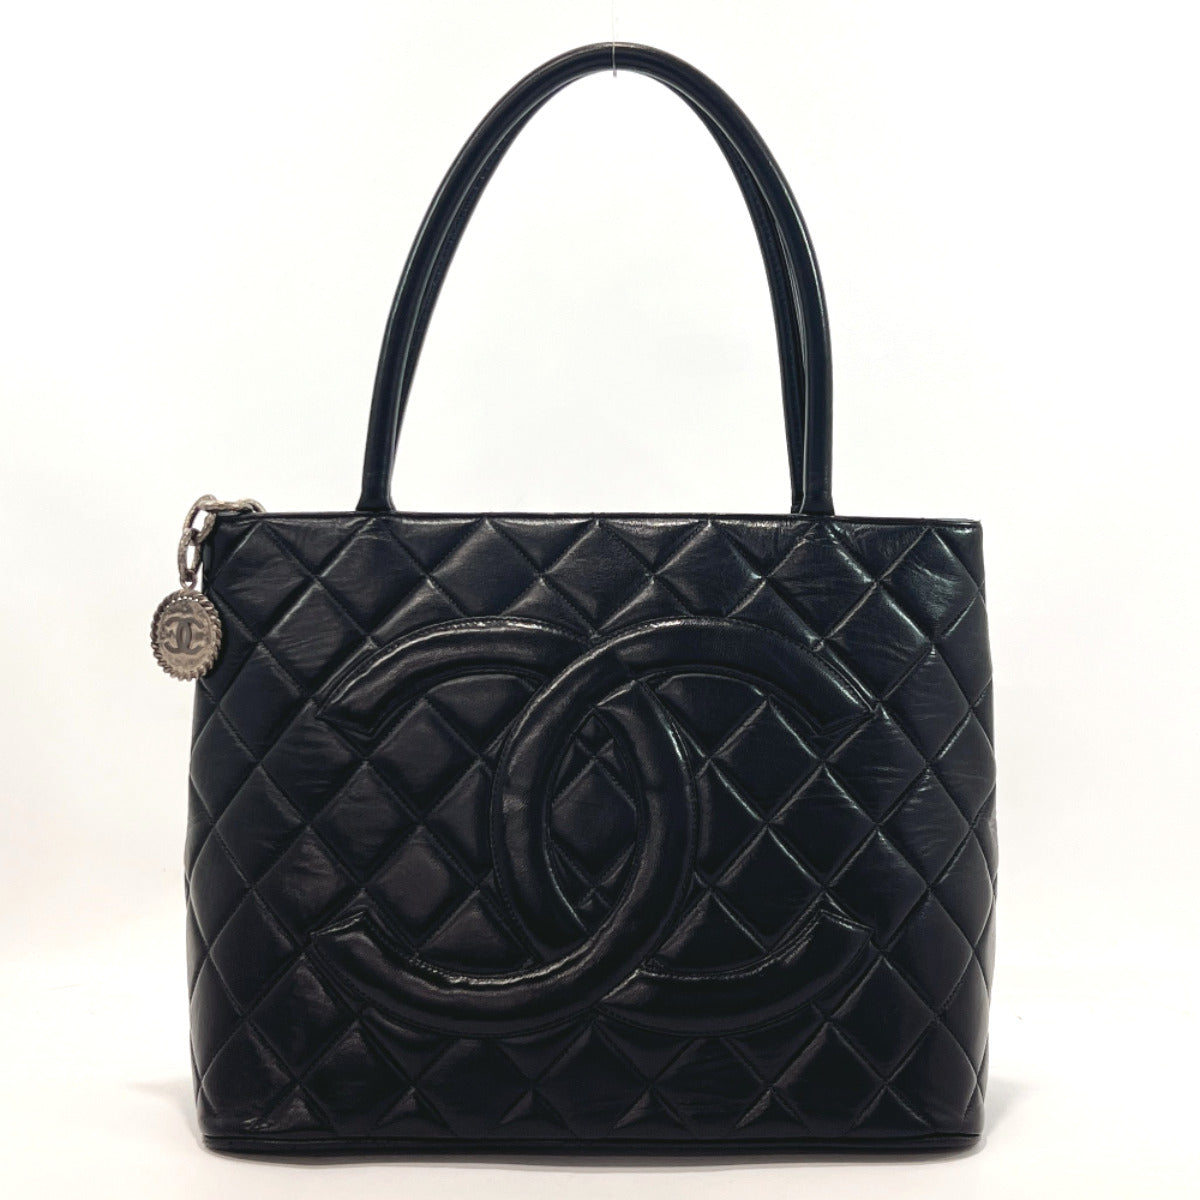 Get the best deals on CHANEL Caviar Tote Black Bags & Handbags for